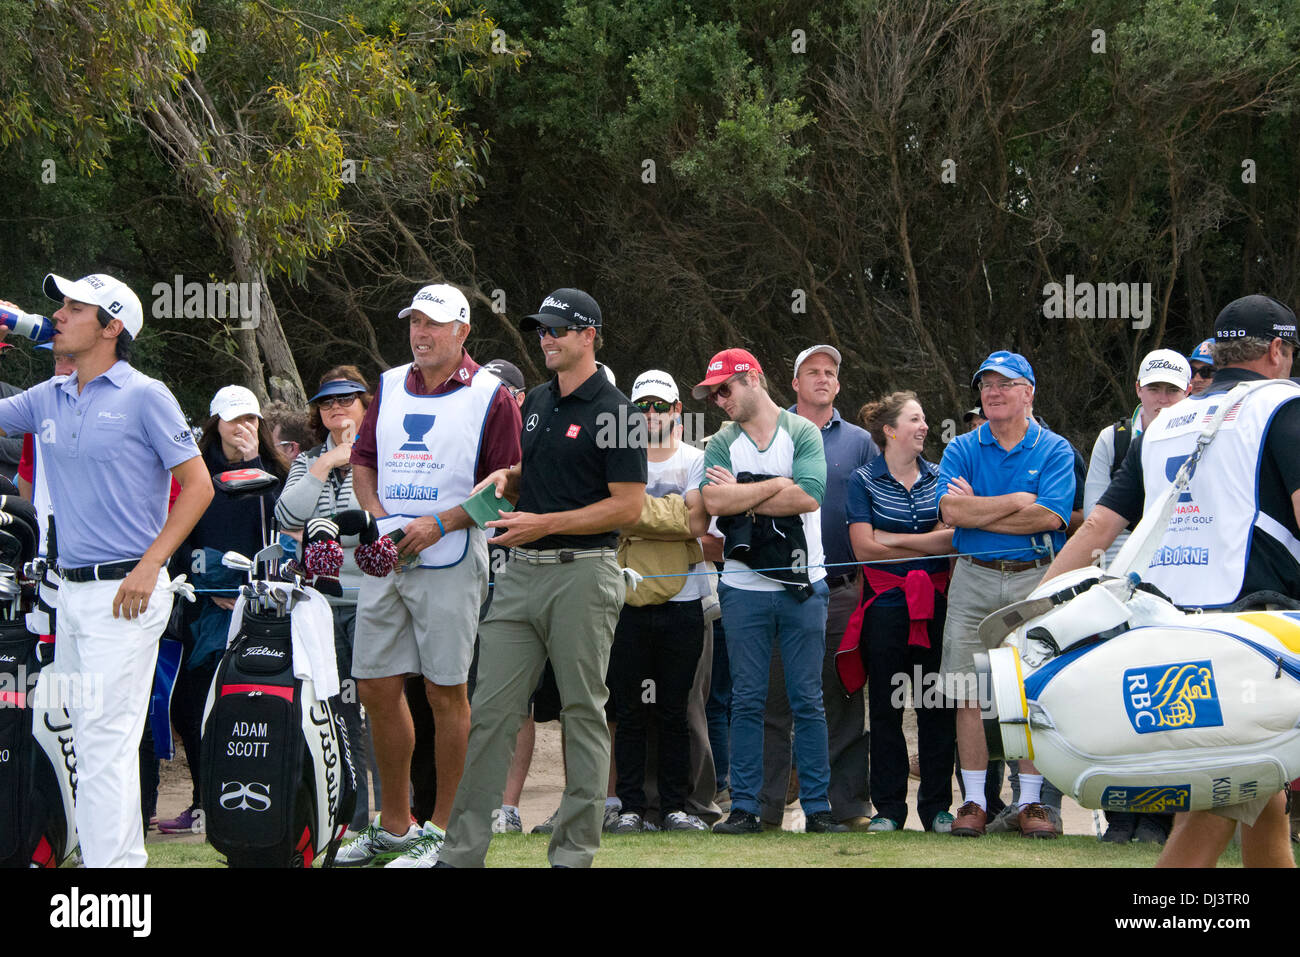 Adam Scott standing with his caddy score card in hand smiling casual with fans onlooking at the world cup royal melbourne 2013 Stock Photo